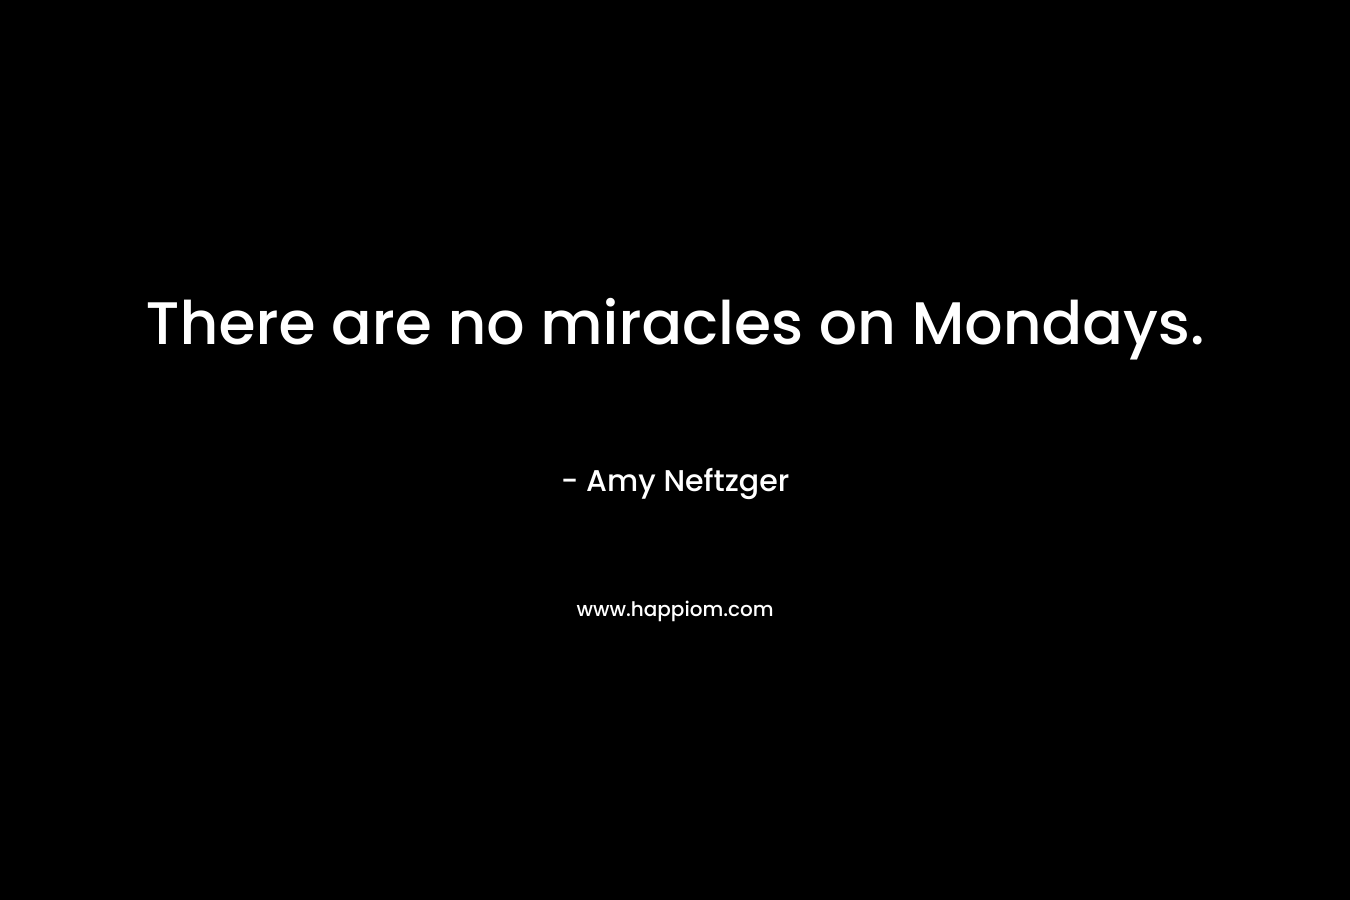 There are no miracles on Mondays. – Amy Neftzger